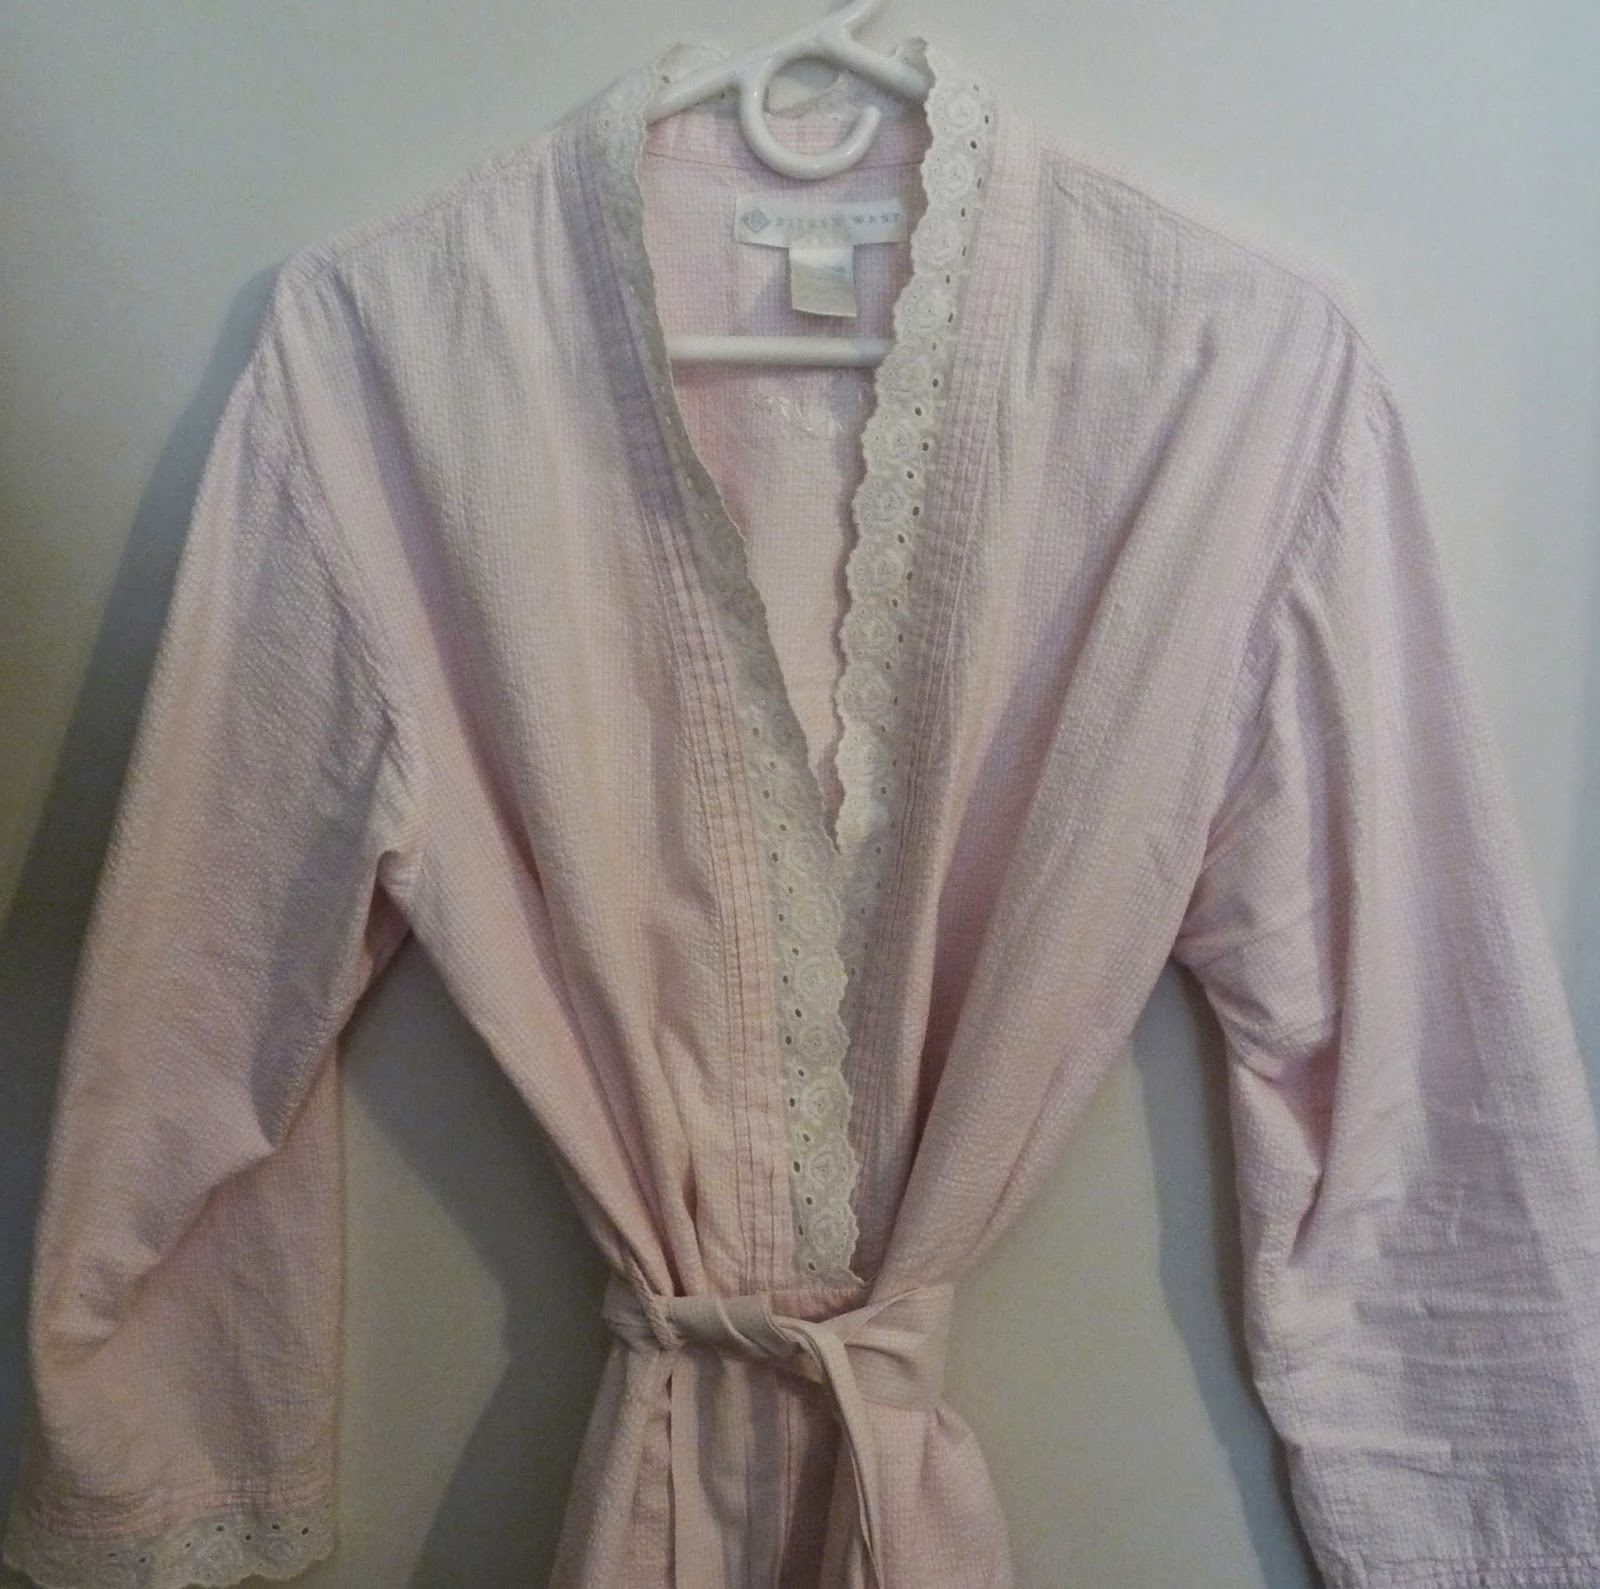 California Stitching: New Project - Summer Robe